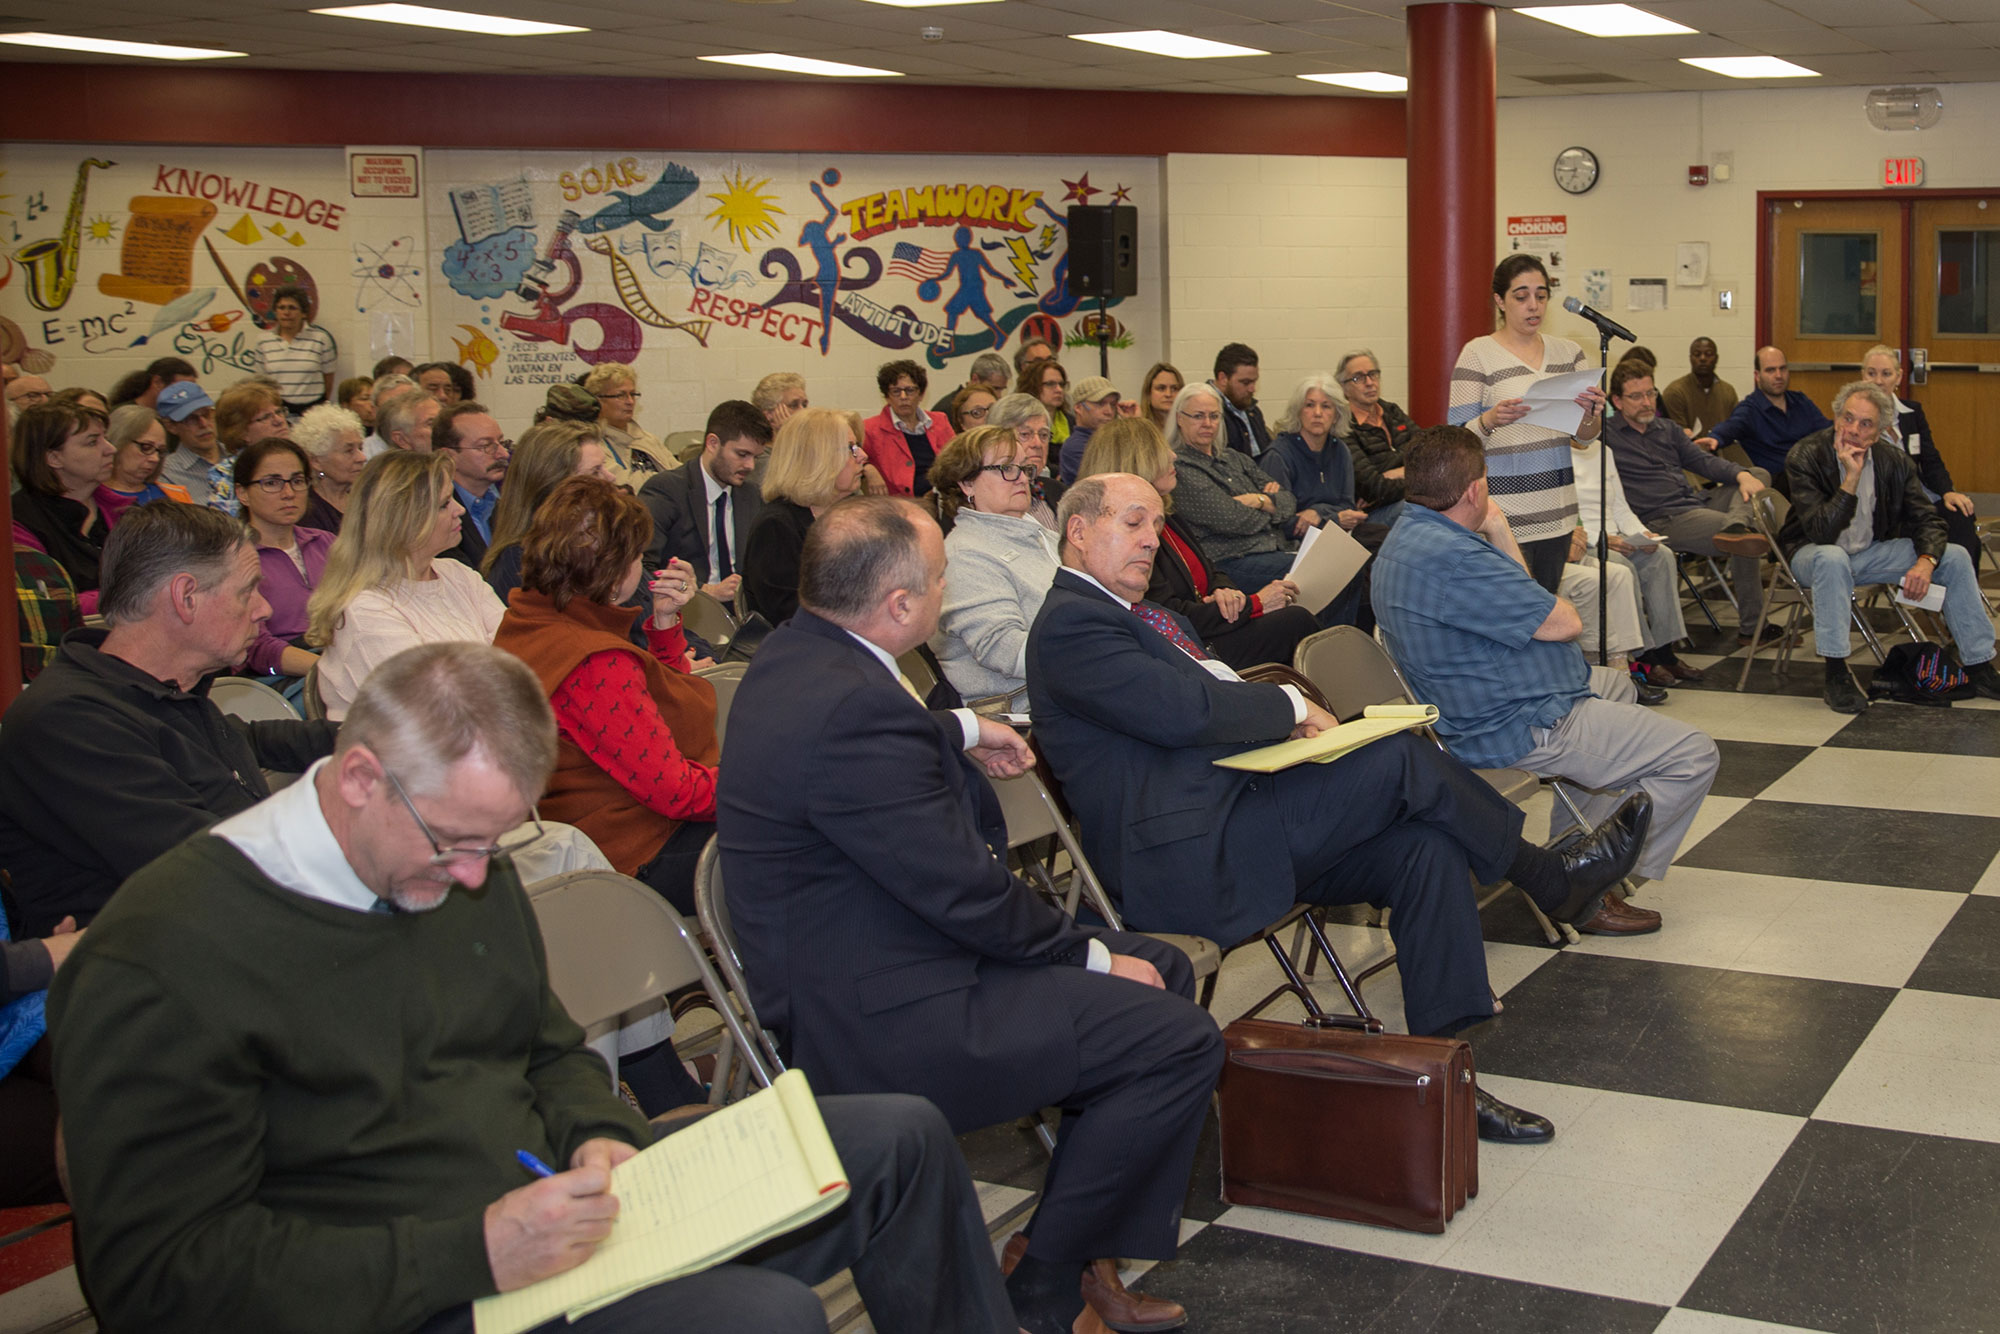 Stakeholders voice their opinions at a public hearing in South Nyack.